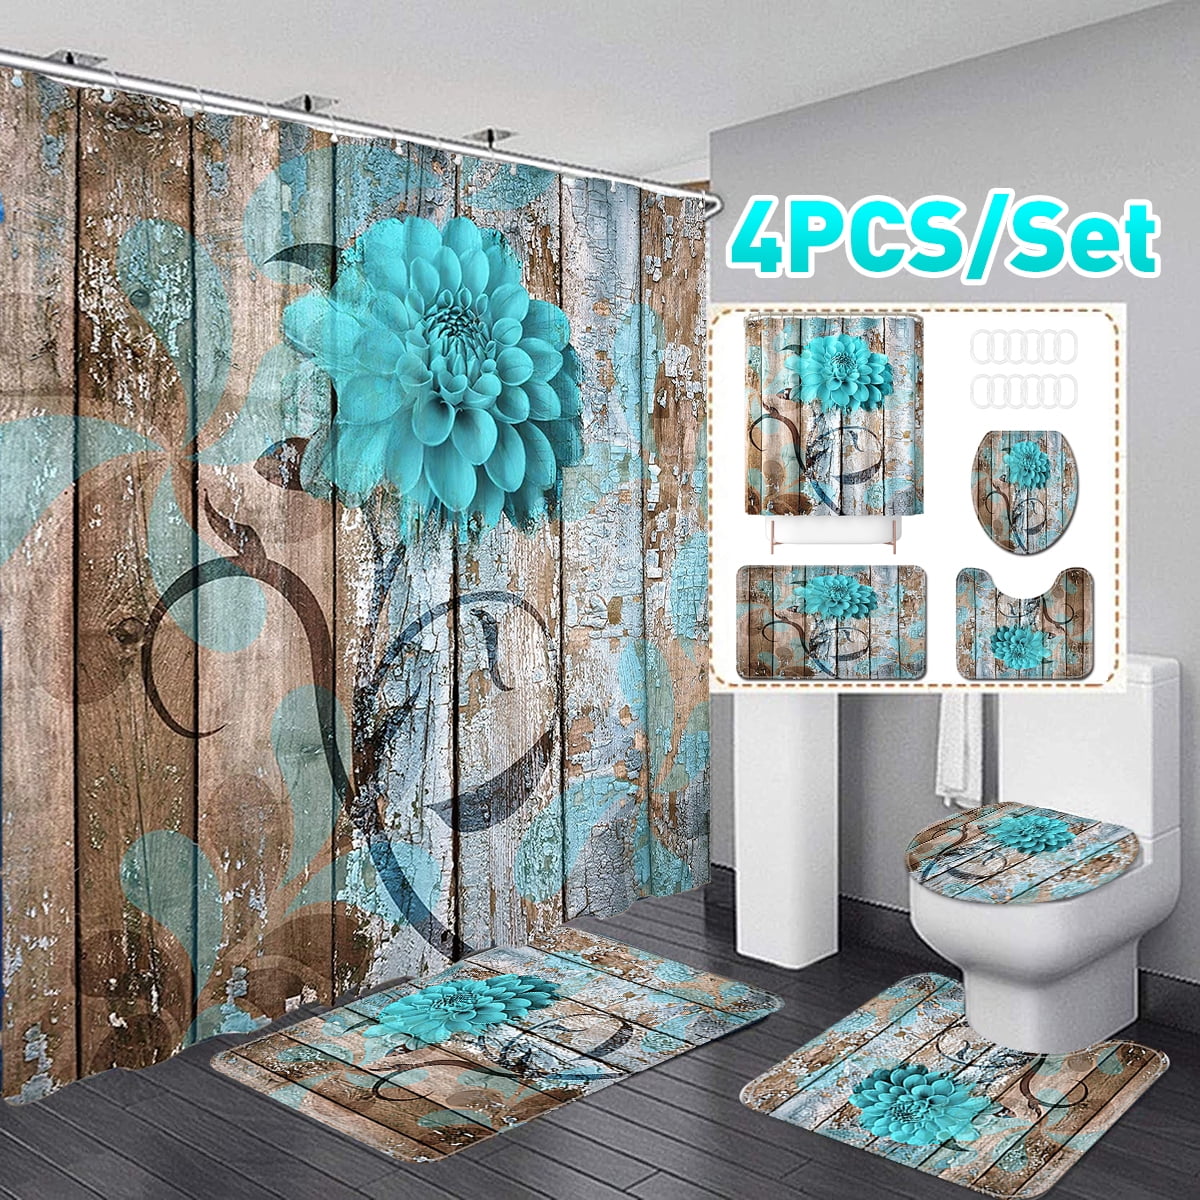 4 Pcs Shower Curtain Set with Non-Slip Rug, Toilet Lid Cover and 